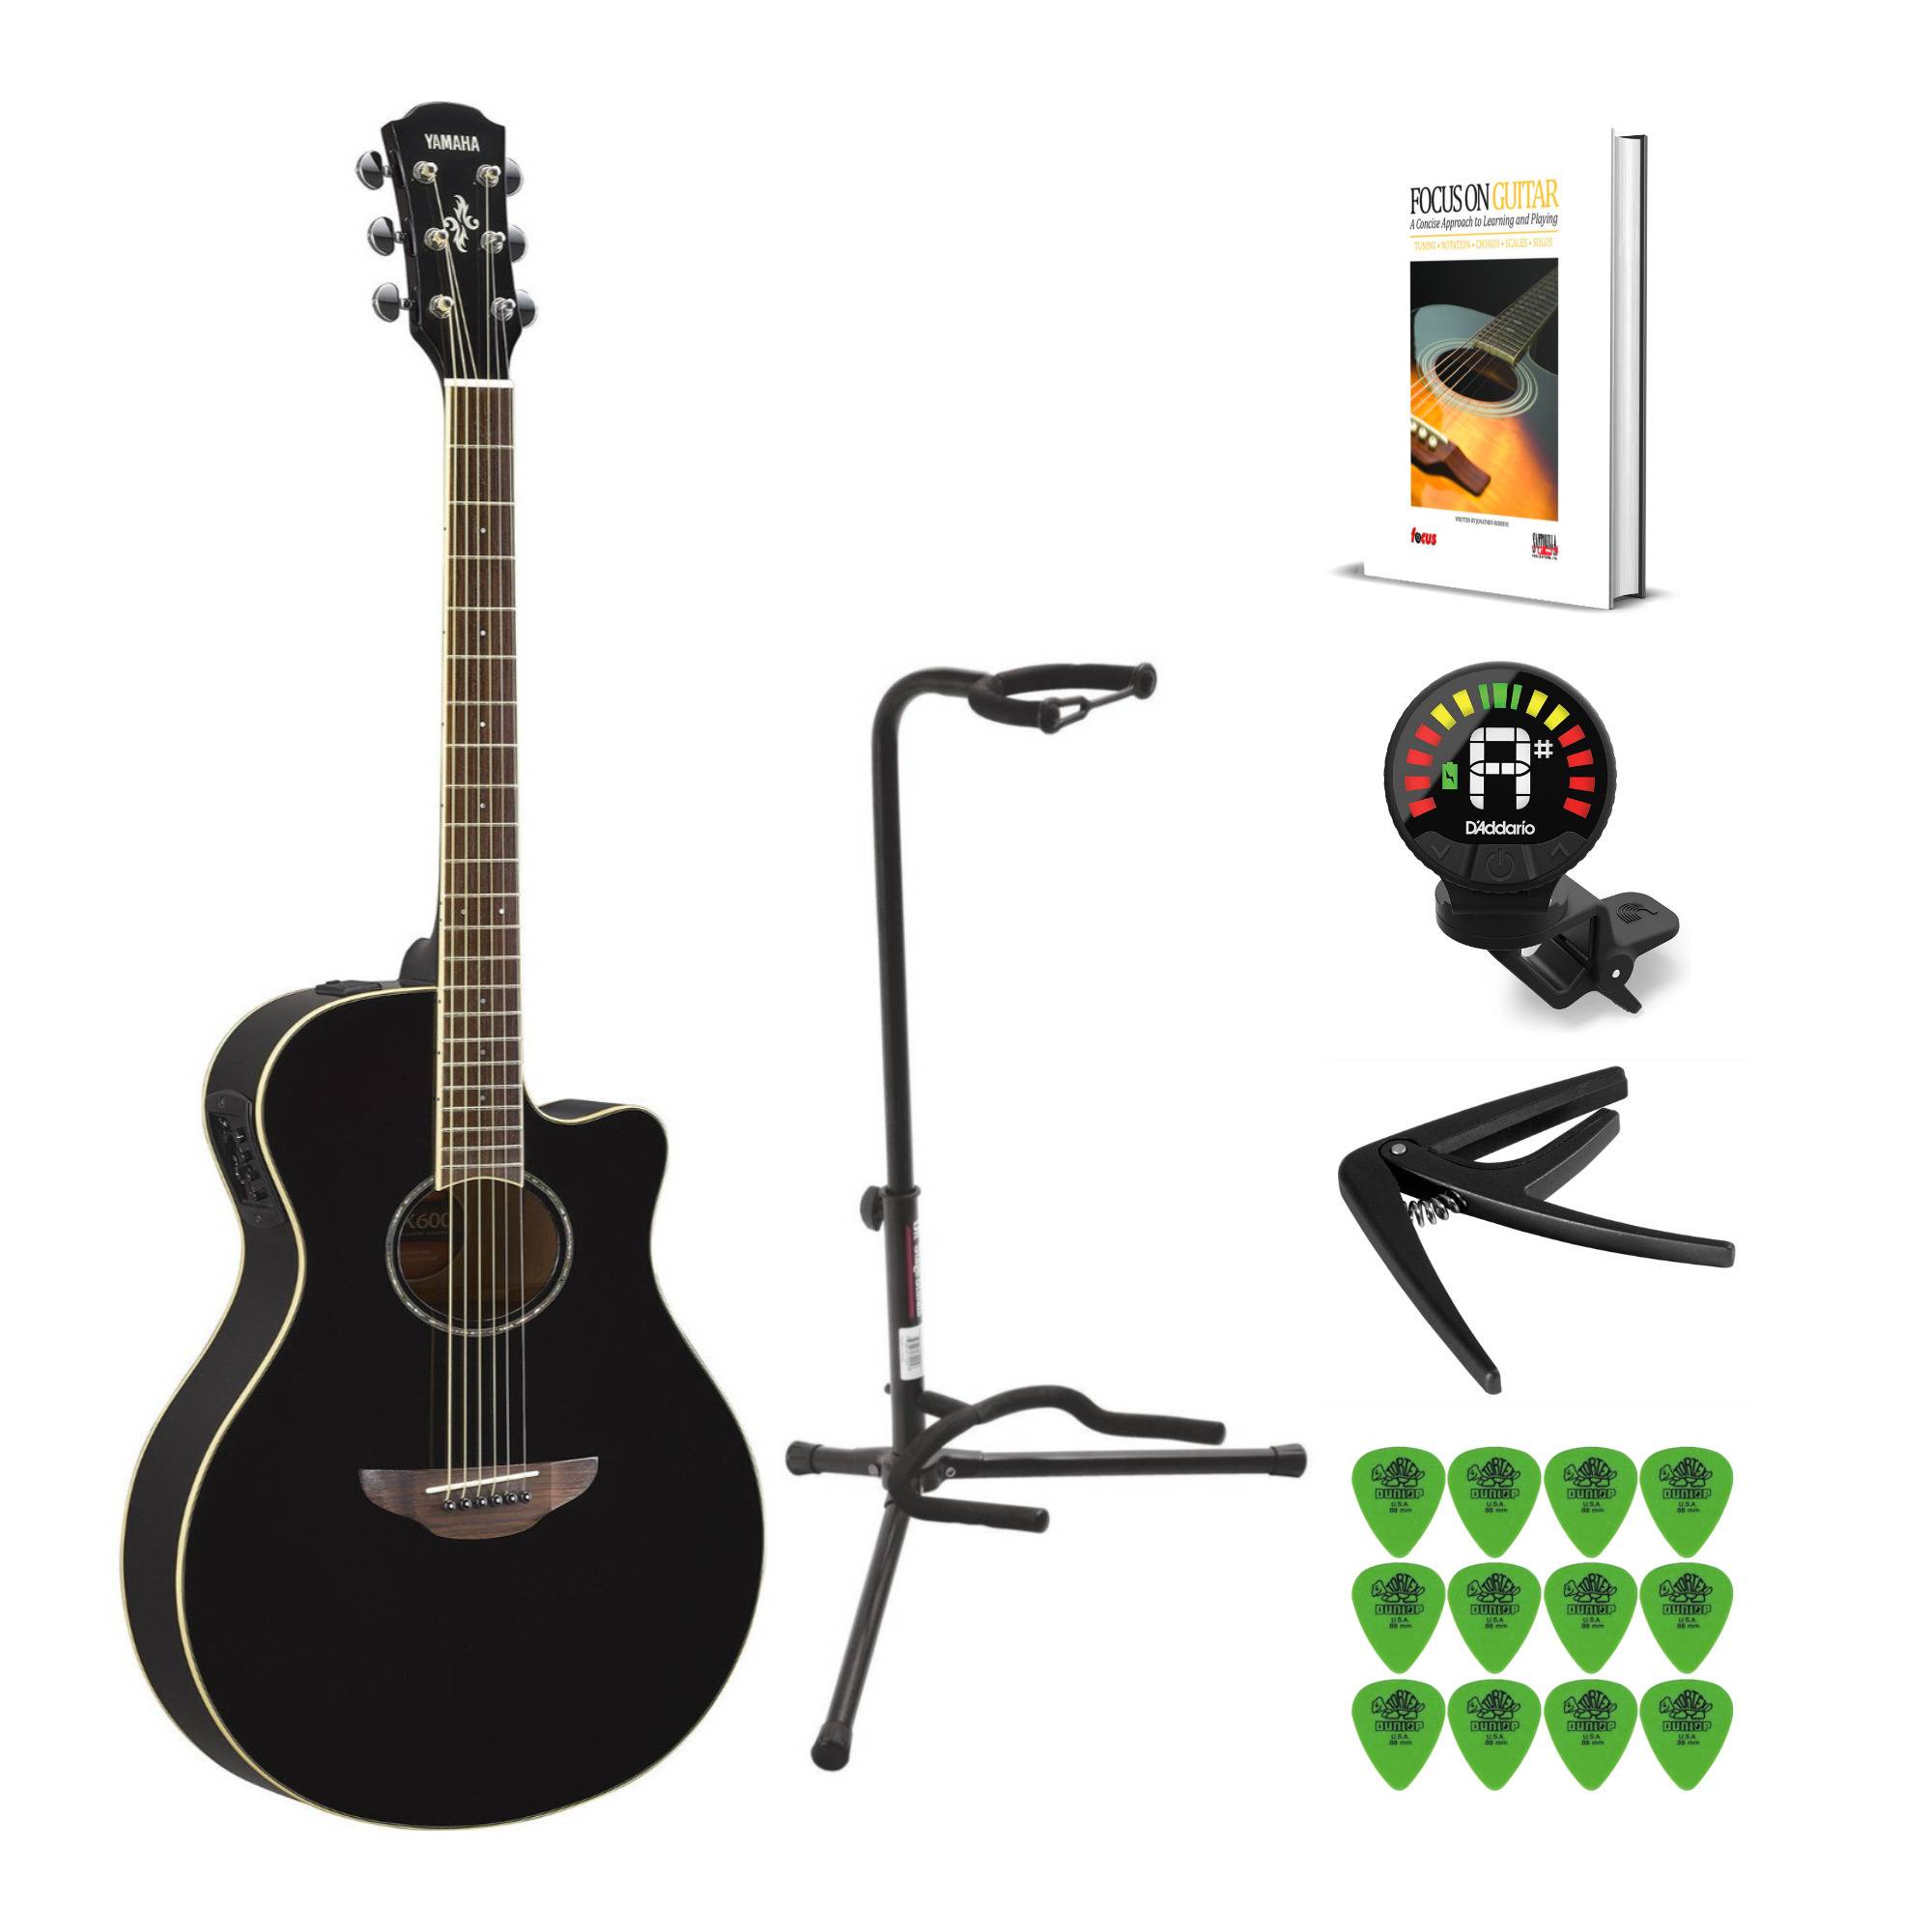 Yamaha APX600BL Thinline Acoustic-Electric Guitar (Black) with Accessory Bundle